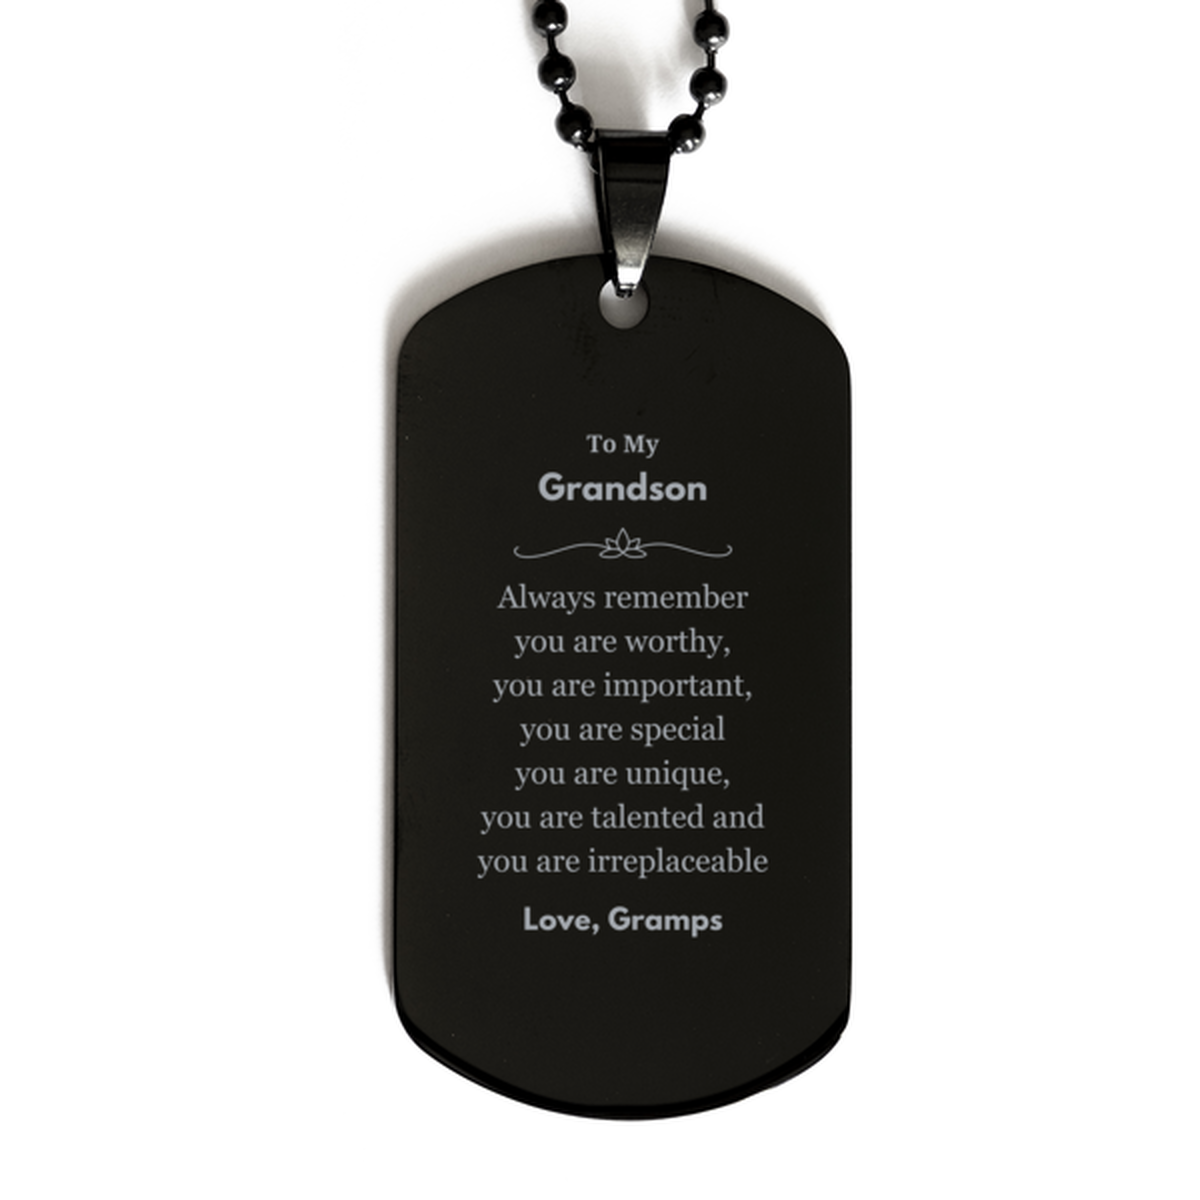 Grandson Birthday Gifts from Gramps, Inspirational Black Dog Tag for Grandson Christmas Graduation Gifts for Grandson Always remember you are worthy, you are important. Love, Gramps